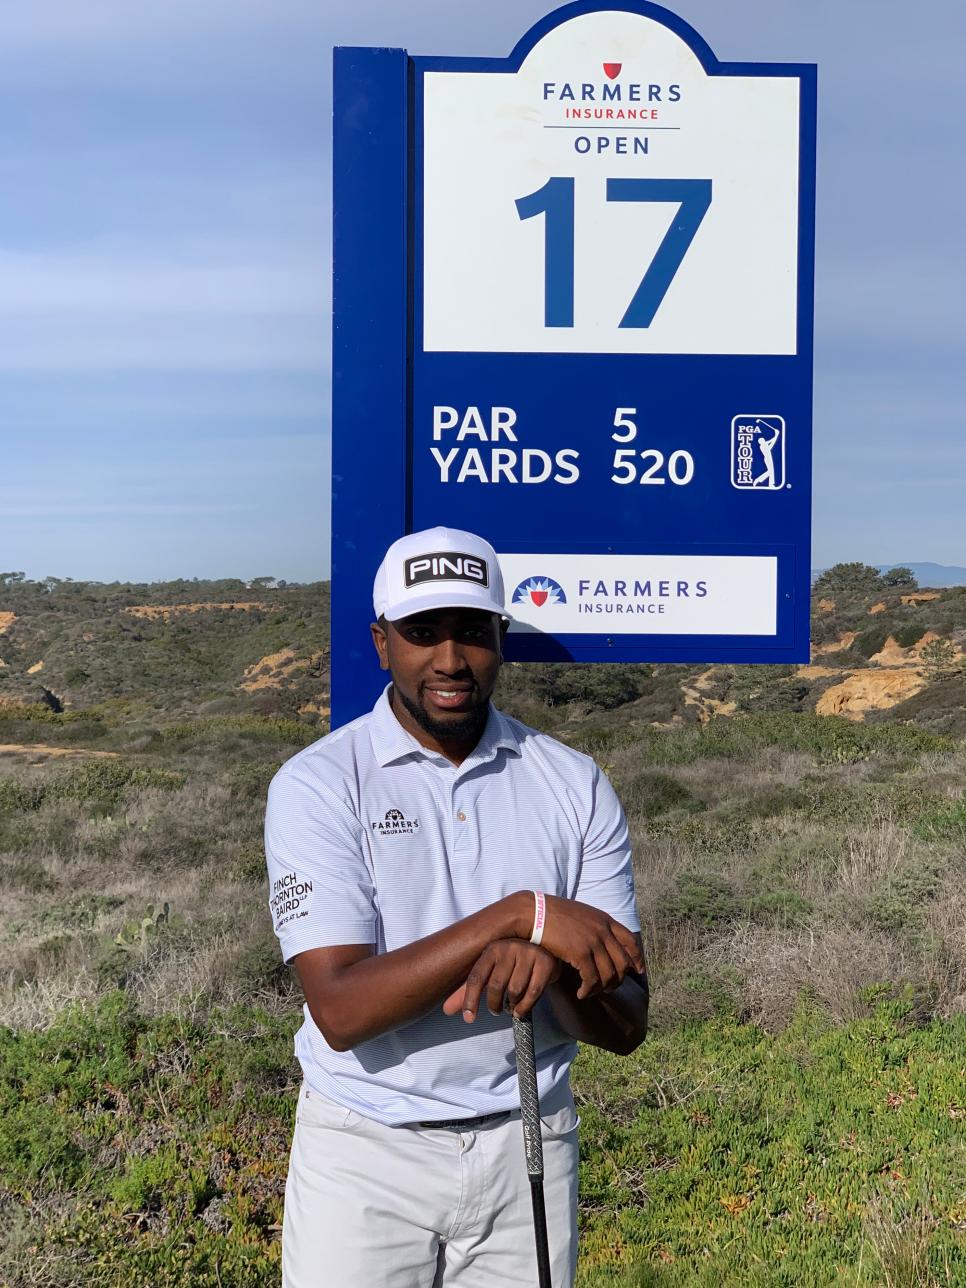 /content/dam/images/golfdigest/fullset/2022/1/ryan alford and farmers sign.jpeg